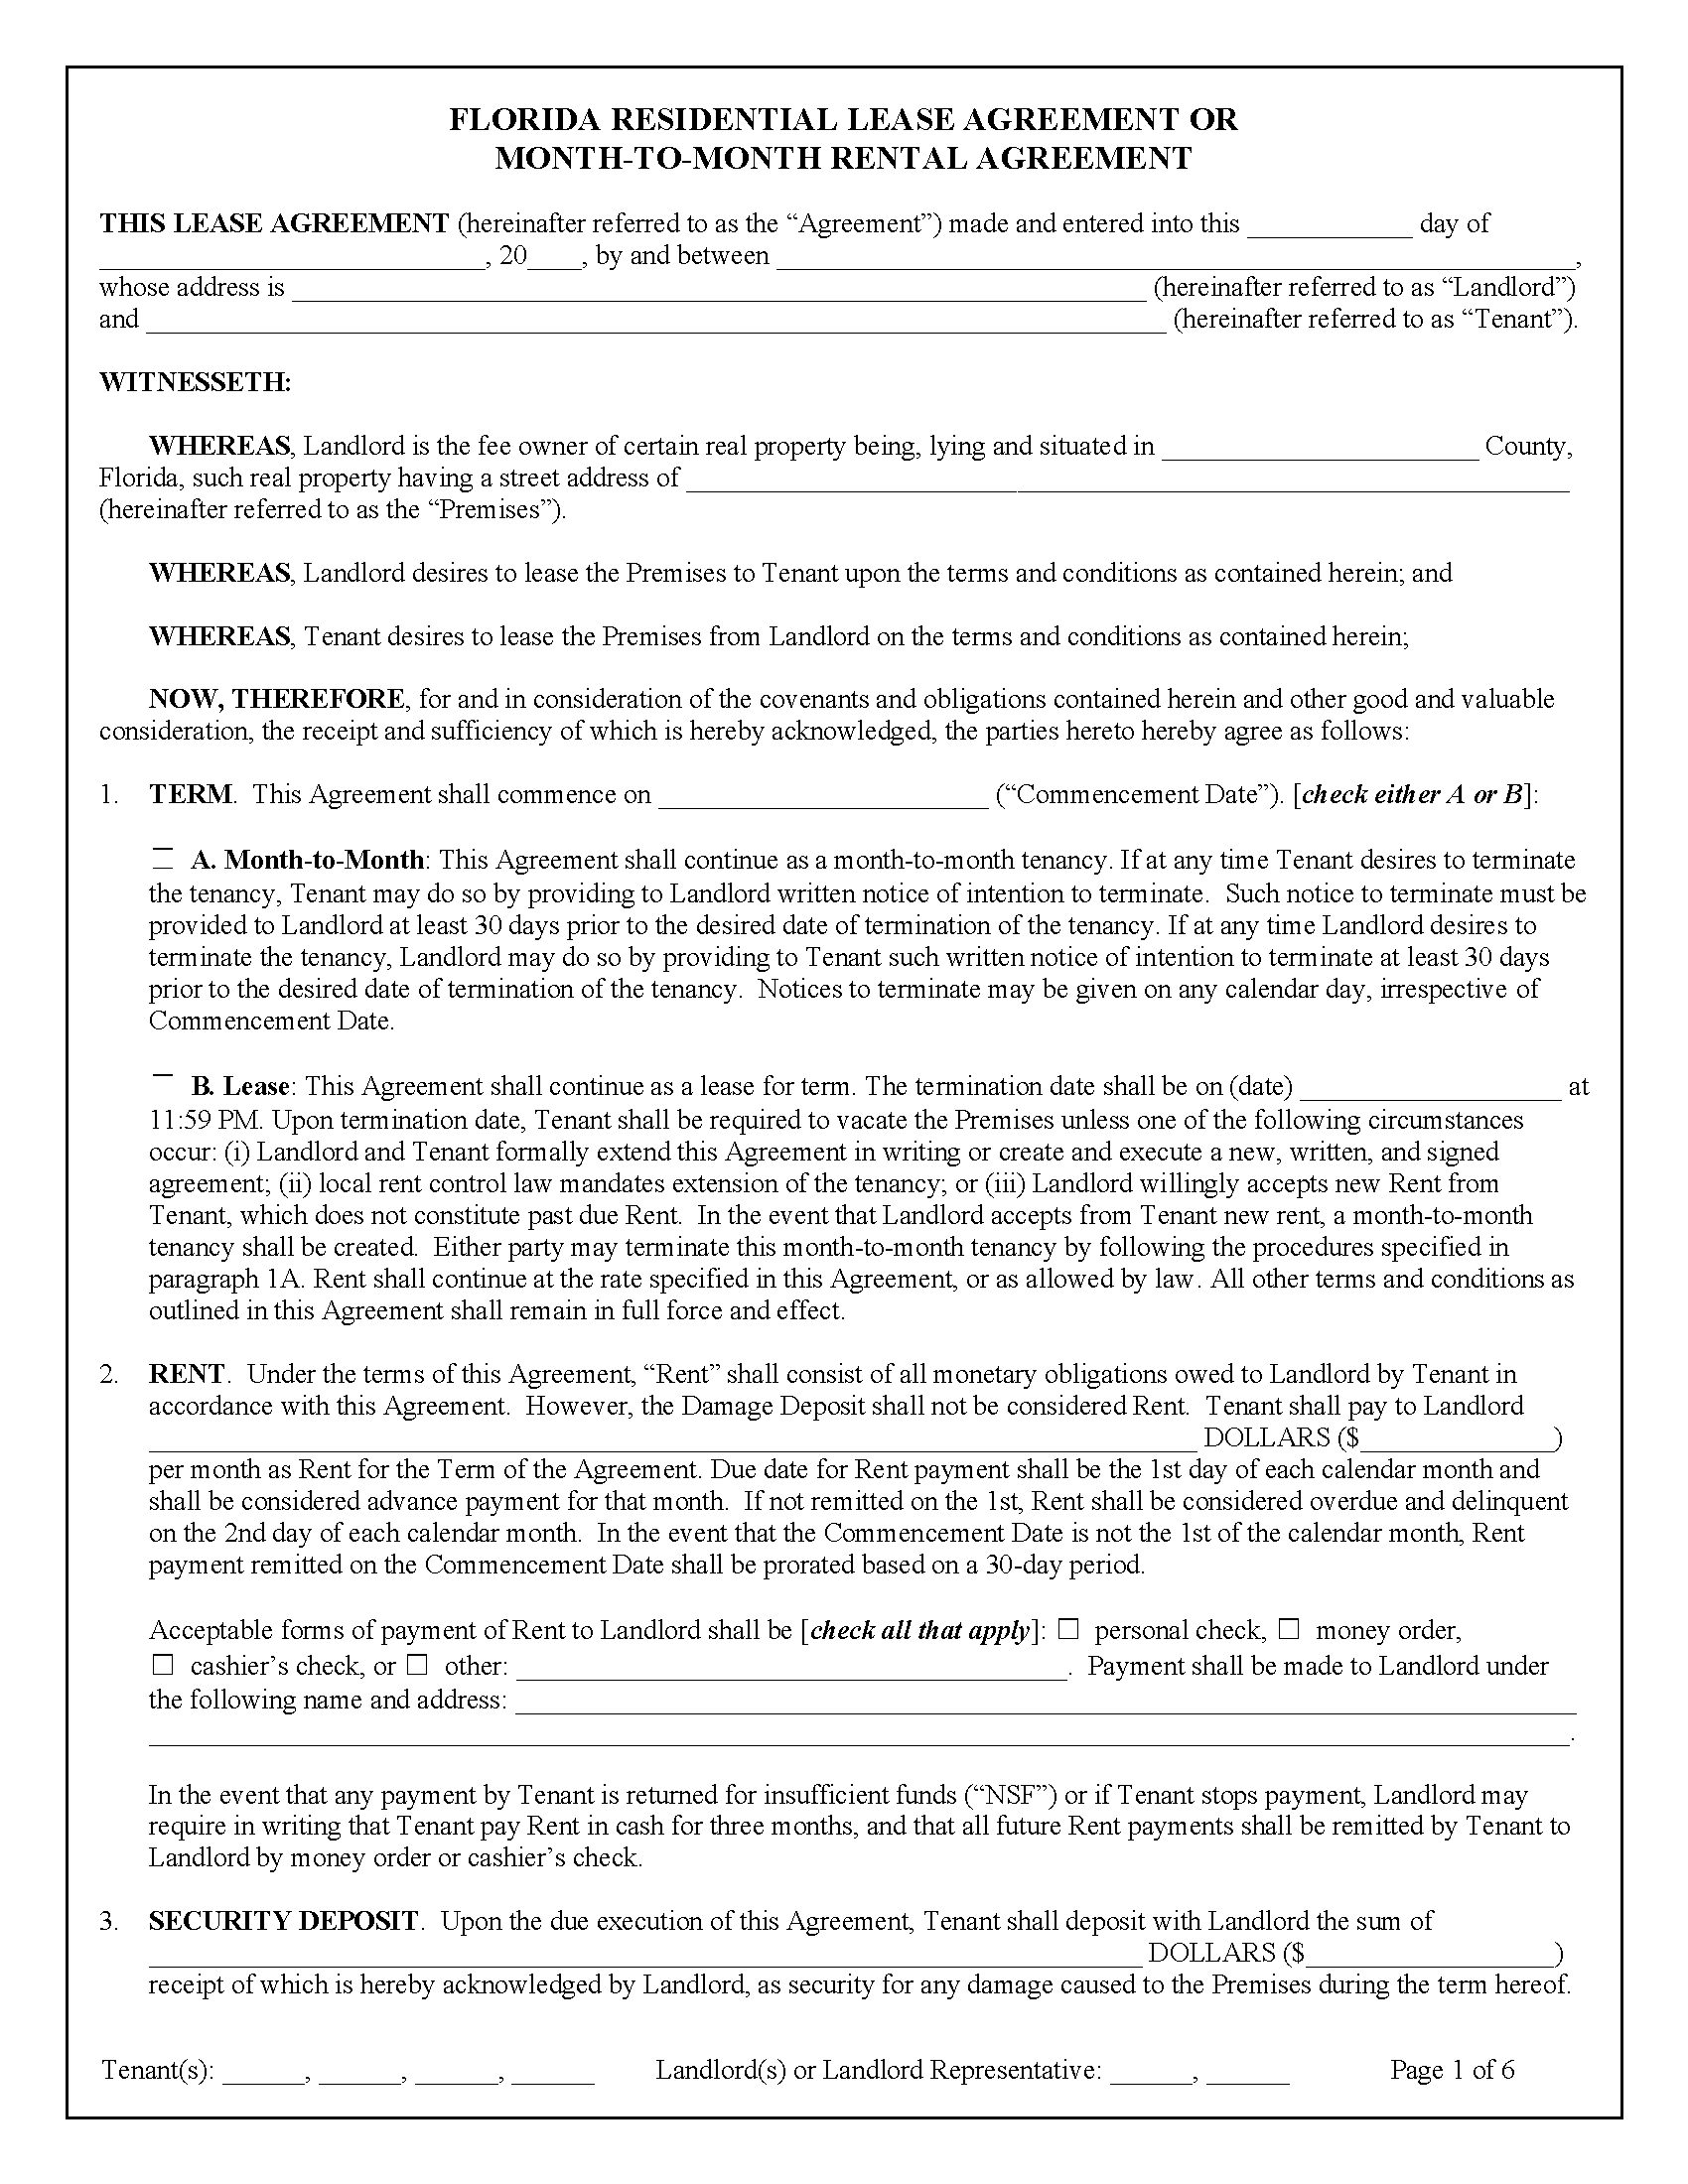 free florida residential lease agreement pdf